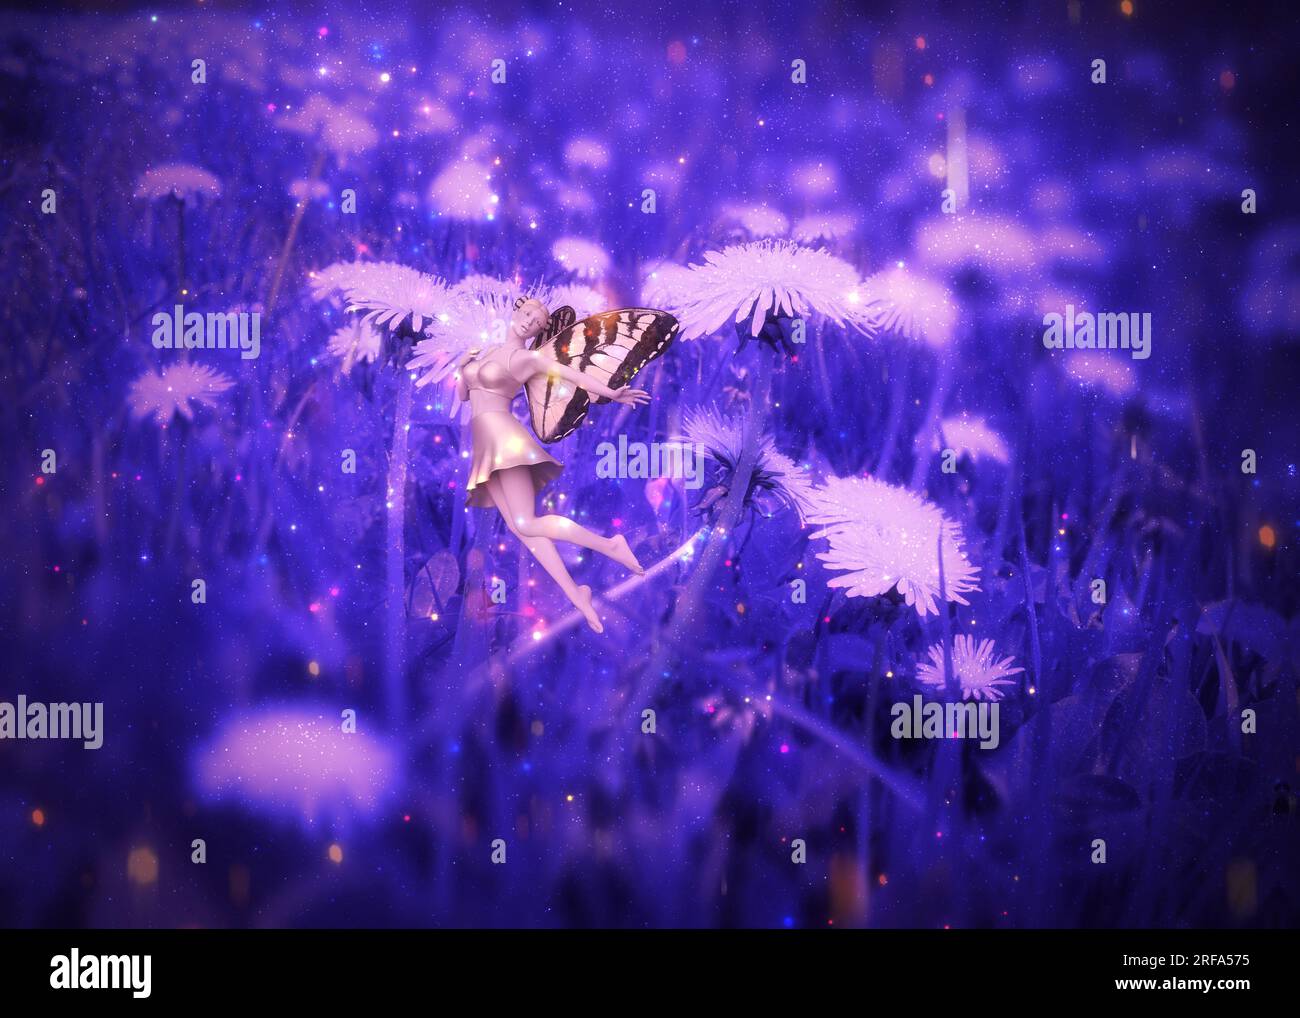 Abstract dandelion flowers in purple grass and 3D fairy girl, photo manipulation, illustration. Stock Photo